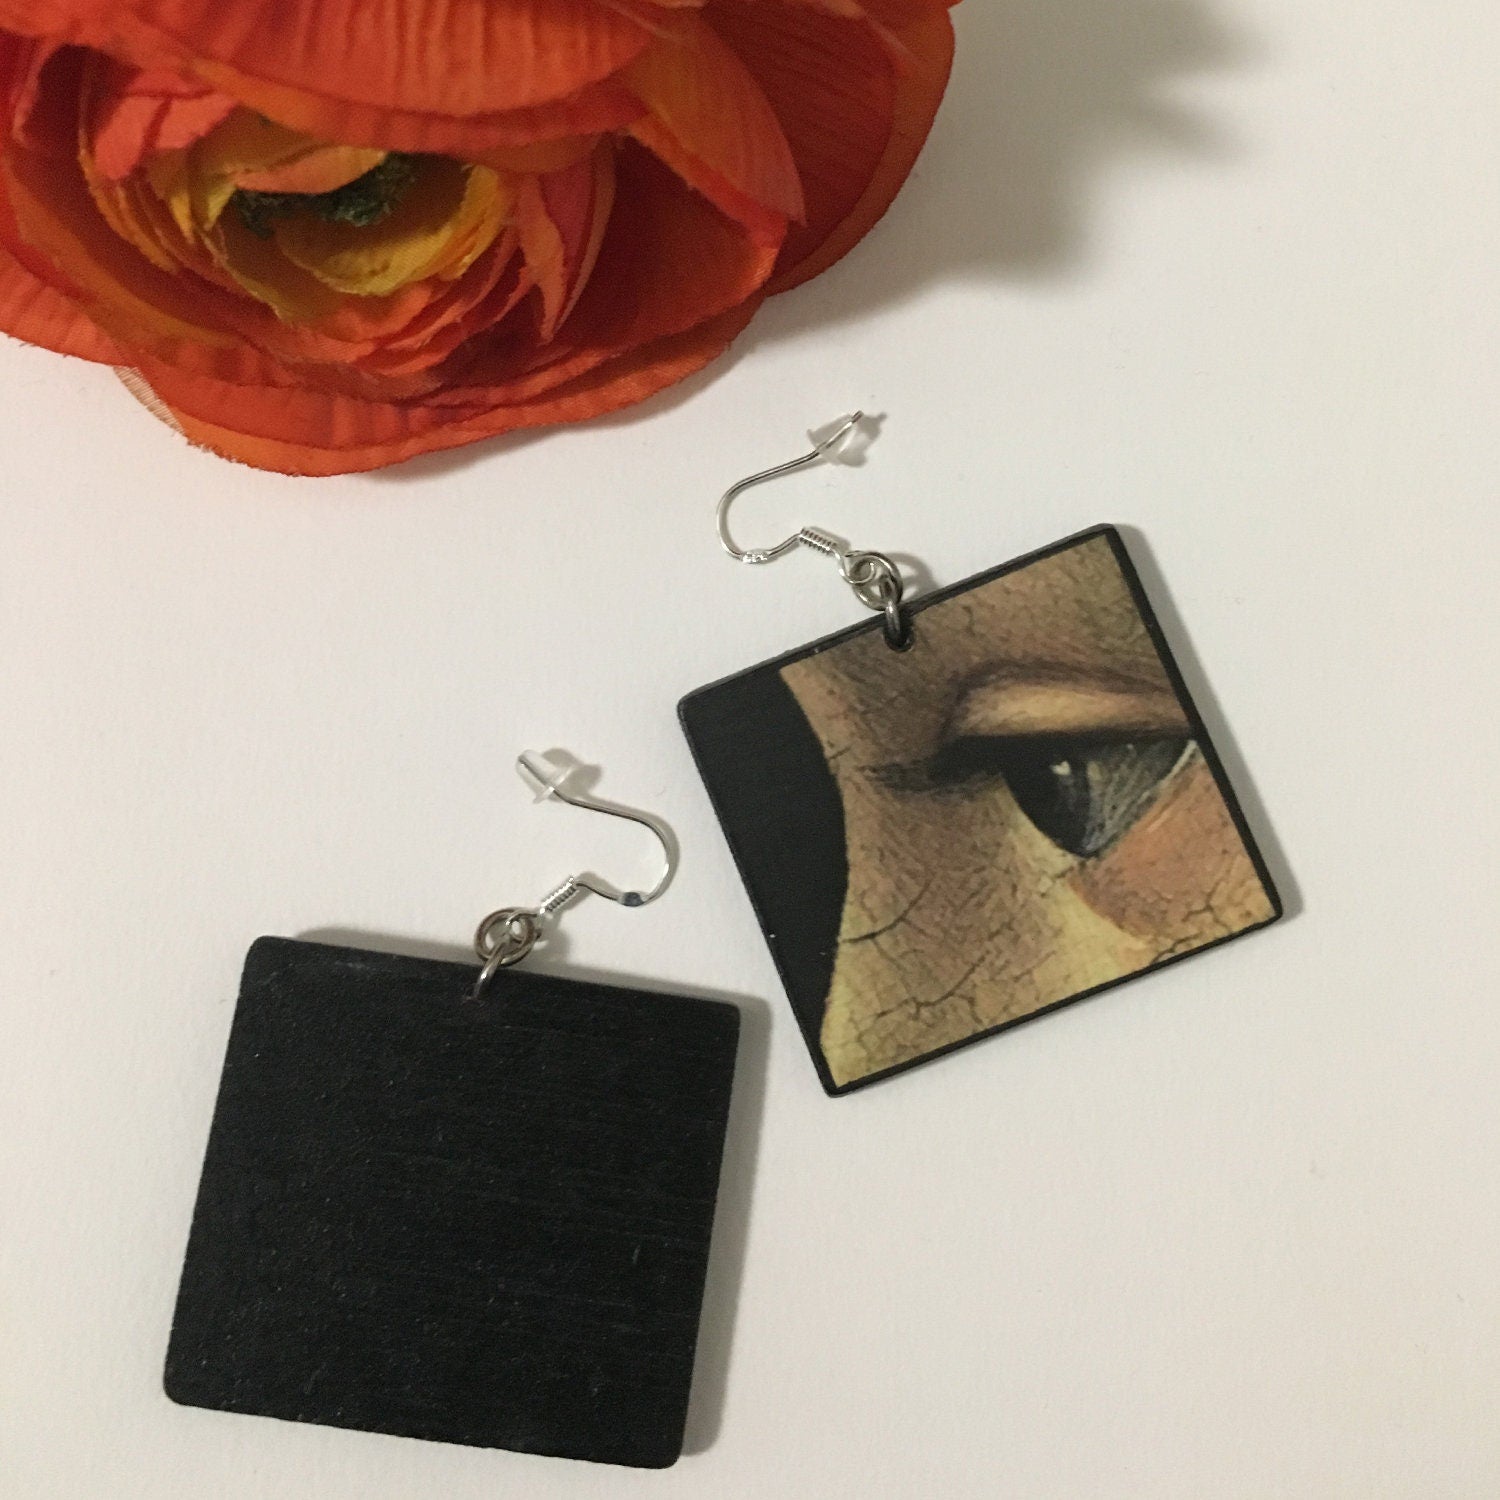 Statement art earrings based on the painting "Portrait of Giovanna Tornabuoni" eye detail by Domenico Ghirlandaio. These handmade wooden earrings are lightweight, the cool artsy, sustainable gift for her.